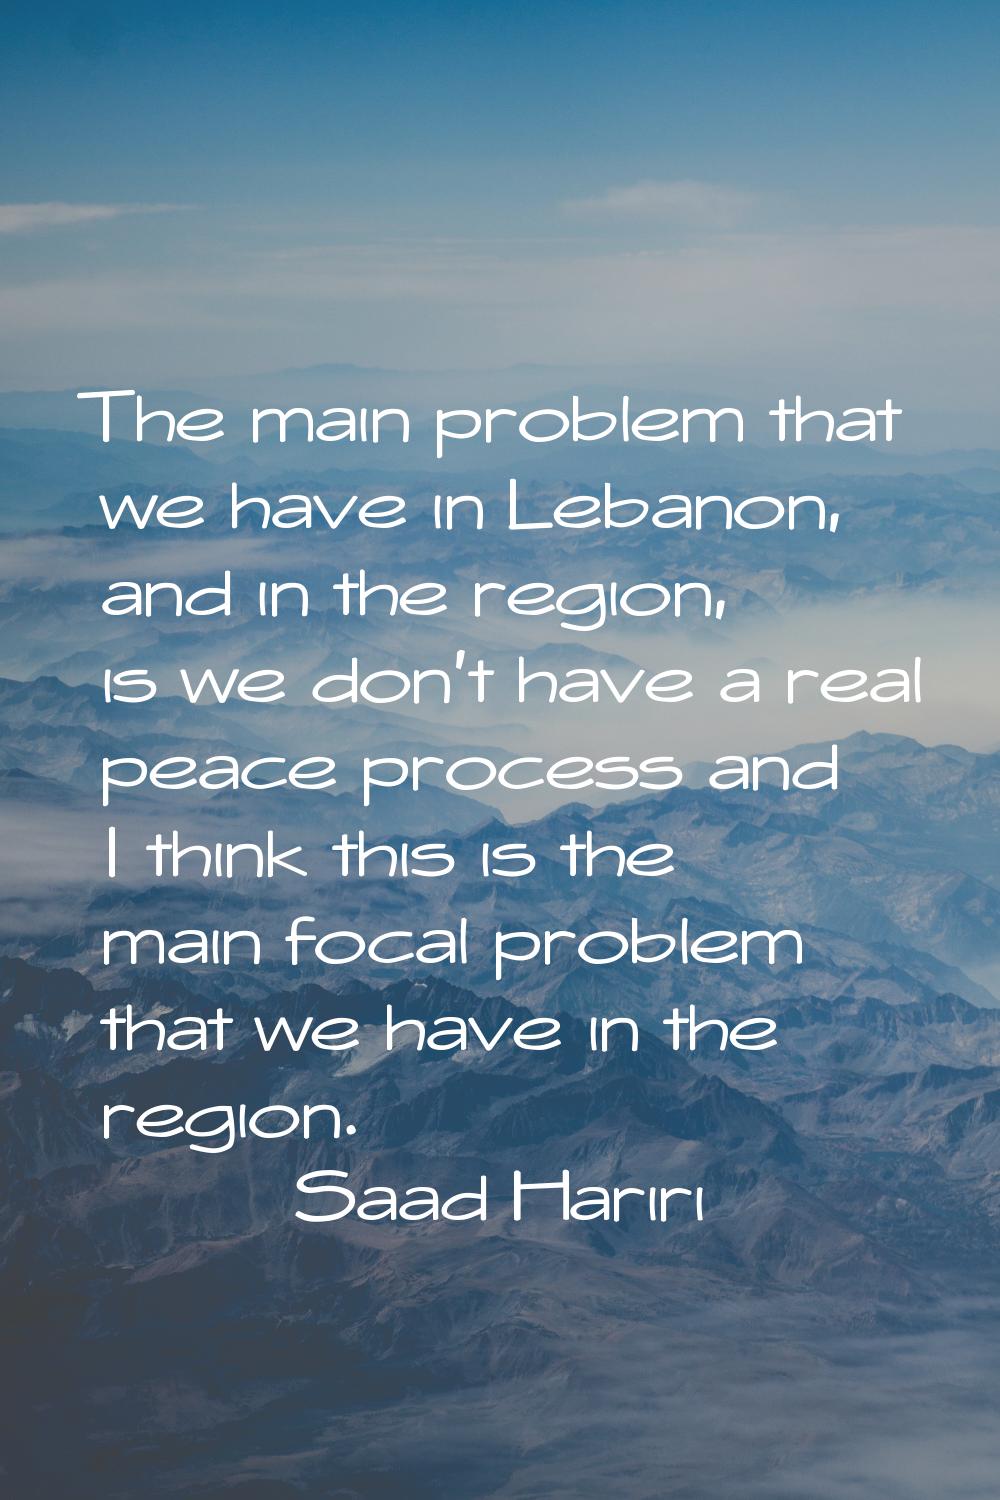 The main problem that we have in Lebanon, and in the region, is we don't have a real peace process 